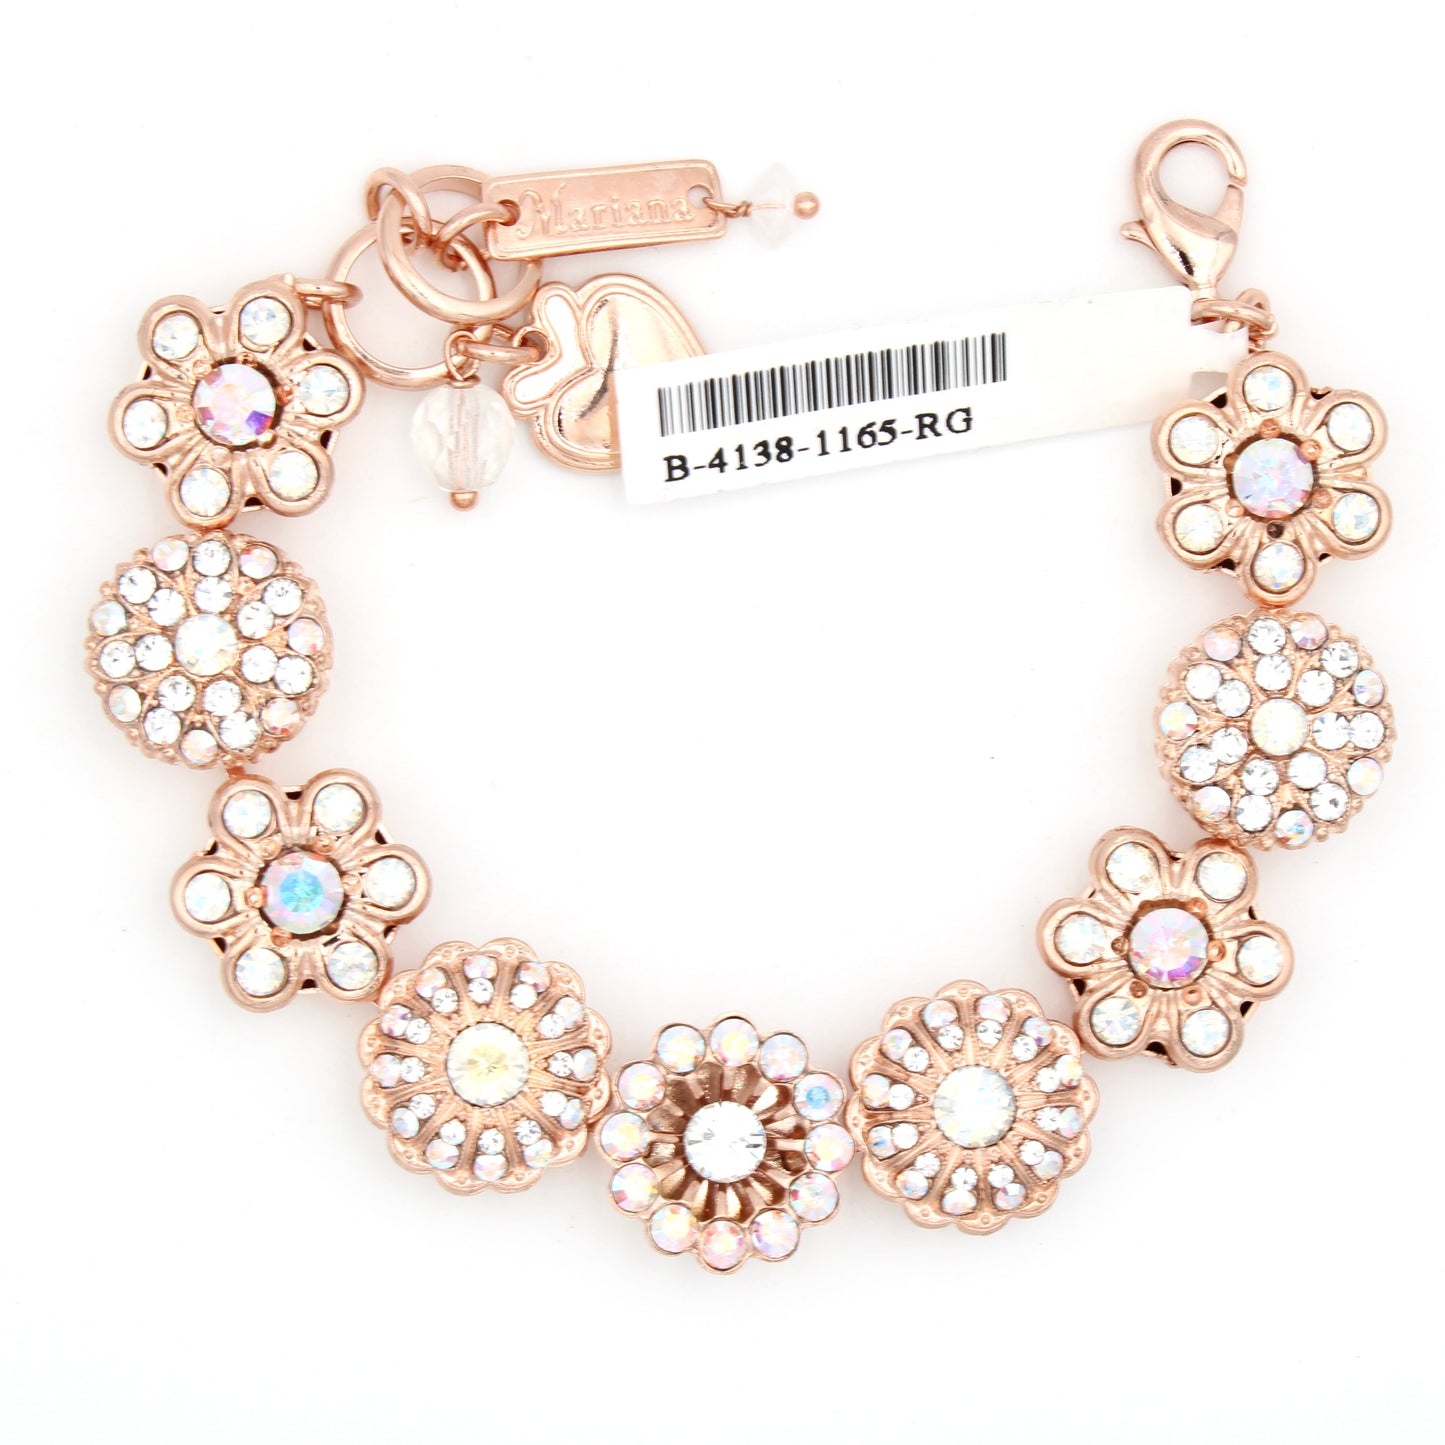 Winds of Change Collection Extra Luxurious Signature Bracelet in Rose Gold